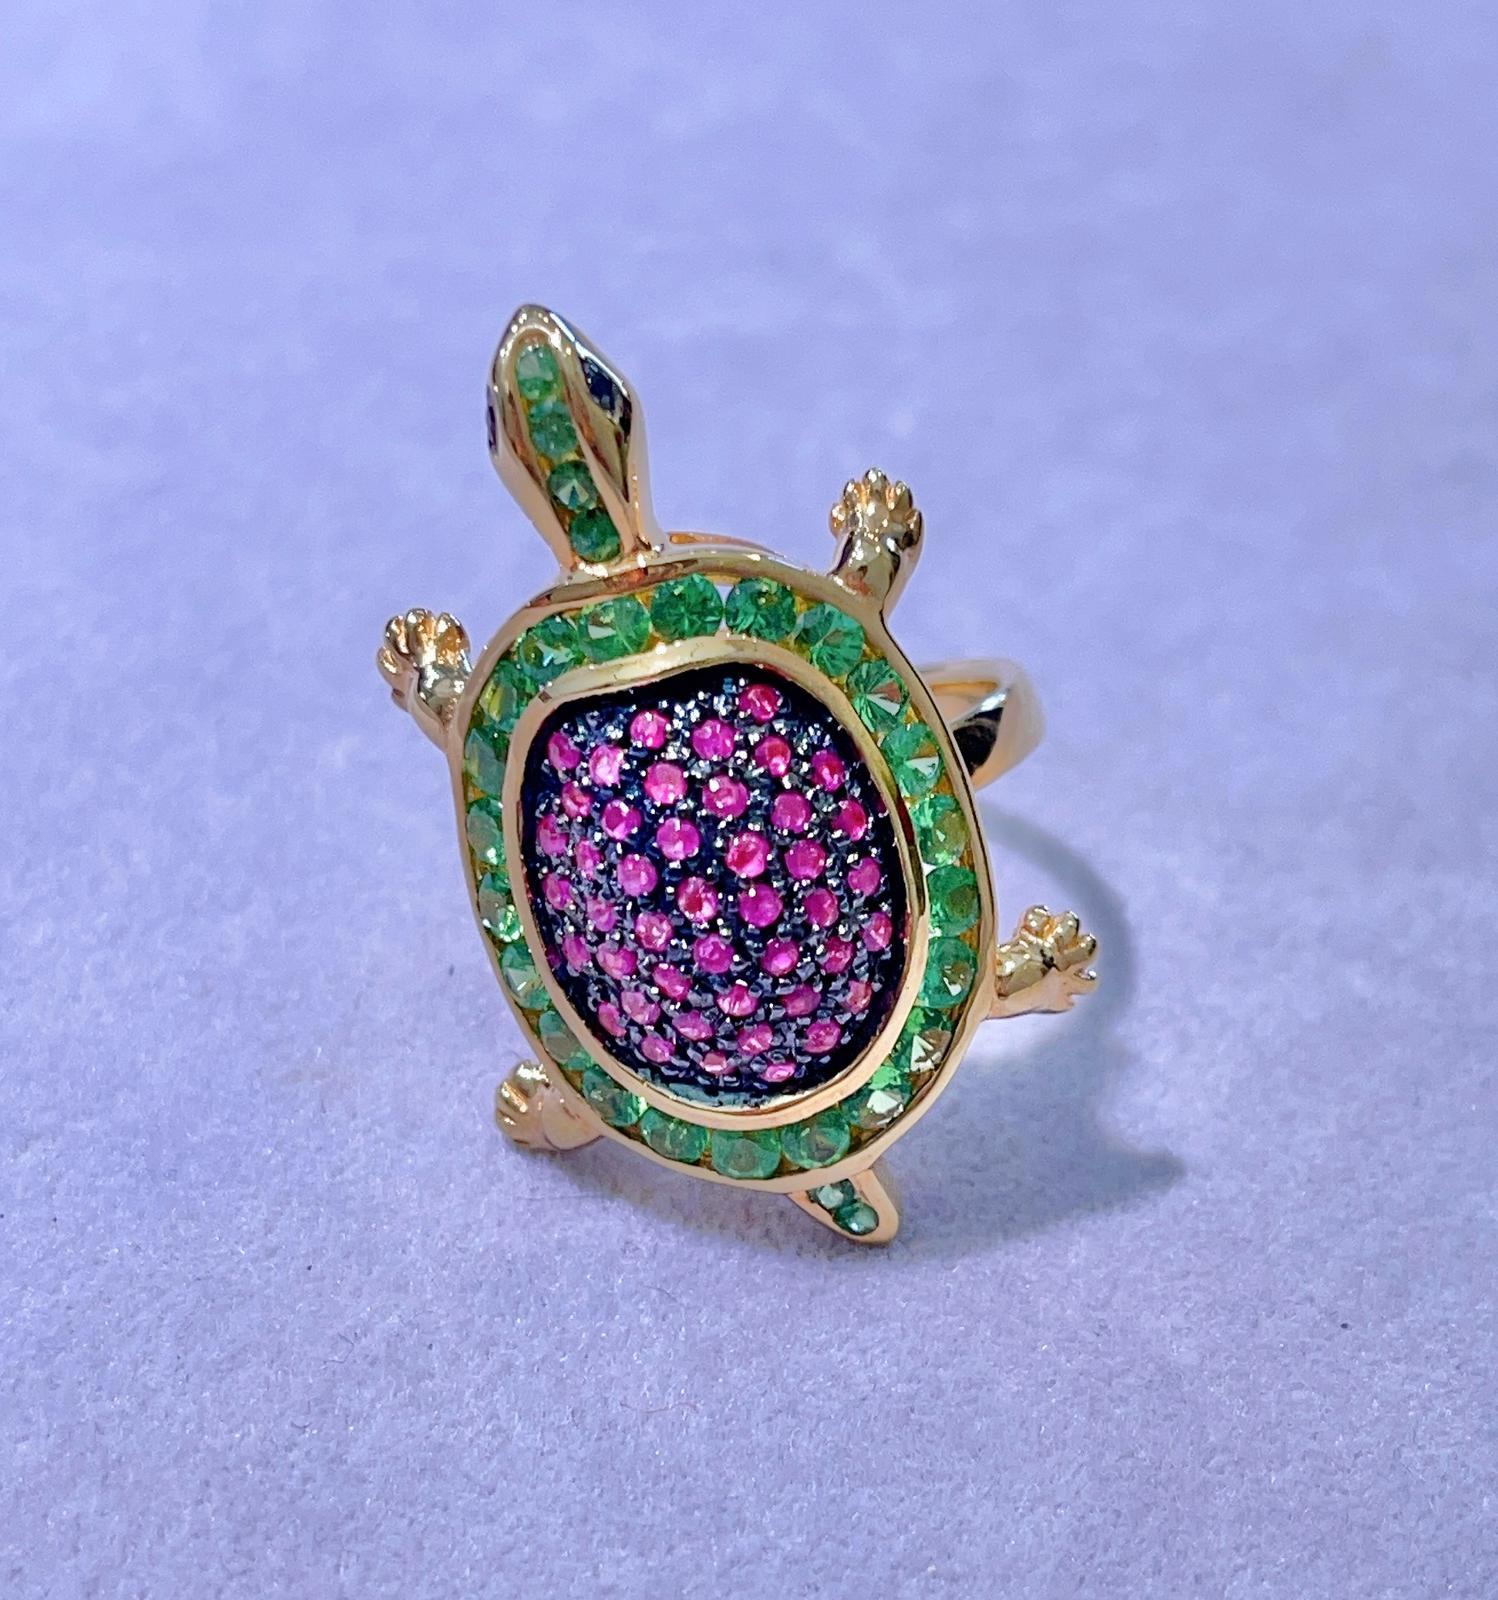 Bochic “Orient” Green Emerald & Pink Sapphire Cocktail Ring Set 22K Gold &Silver 
Multi natural gem Ring 
Beautiful Natural Green Emerald from Zambia  - 7 carats
Natural Pink Sapphires from Sri Lanka - 6 carats 
Round brilliant shapes 
This Rings 